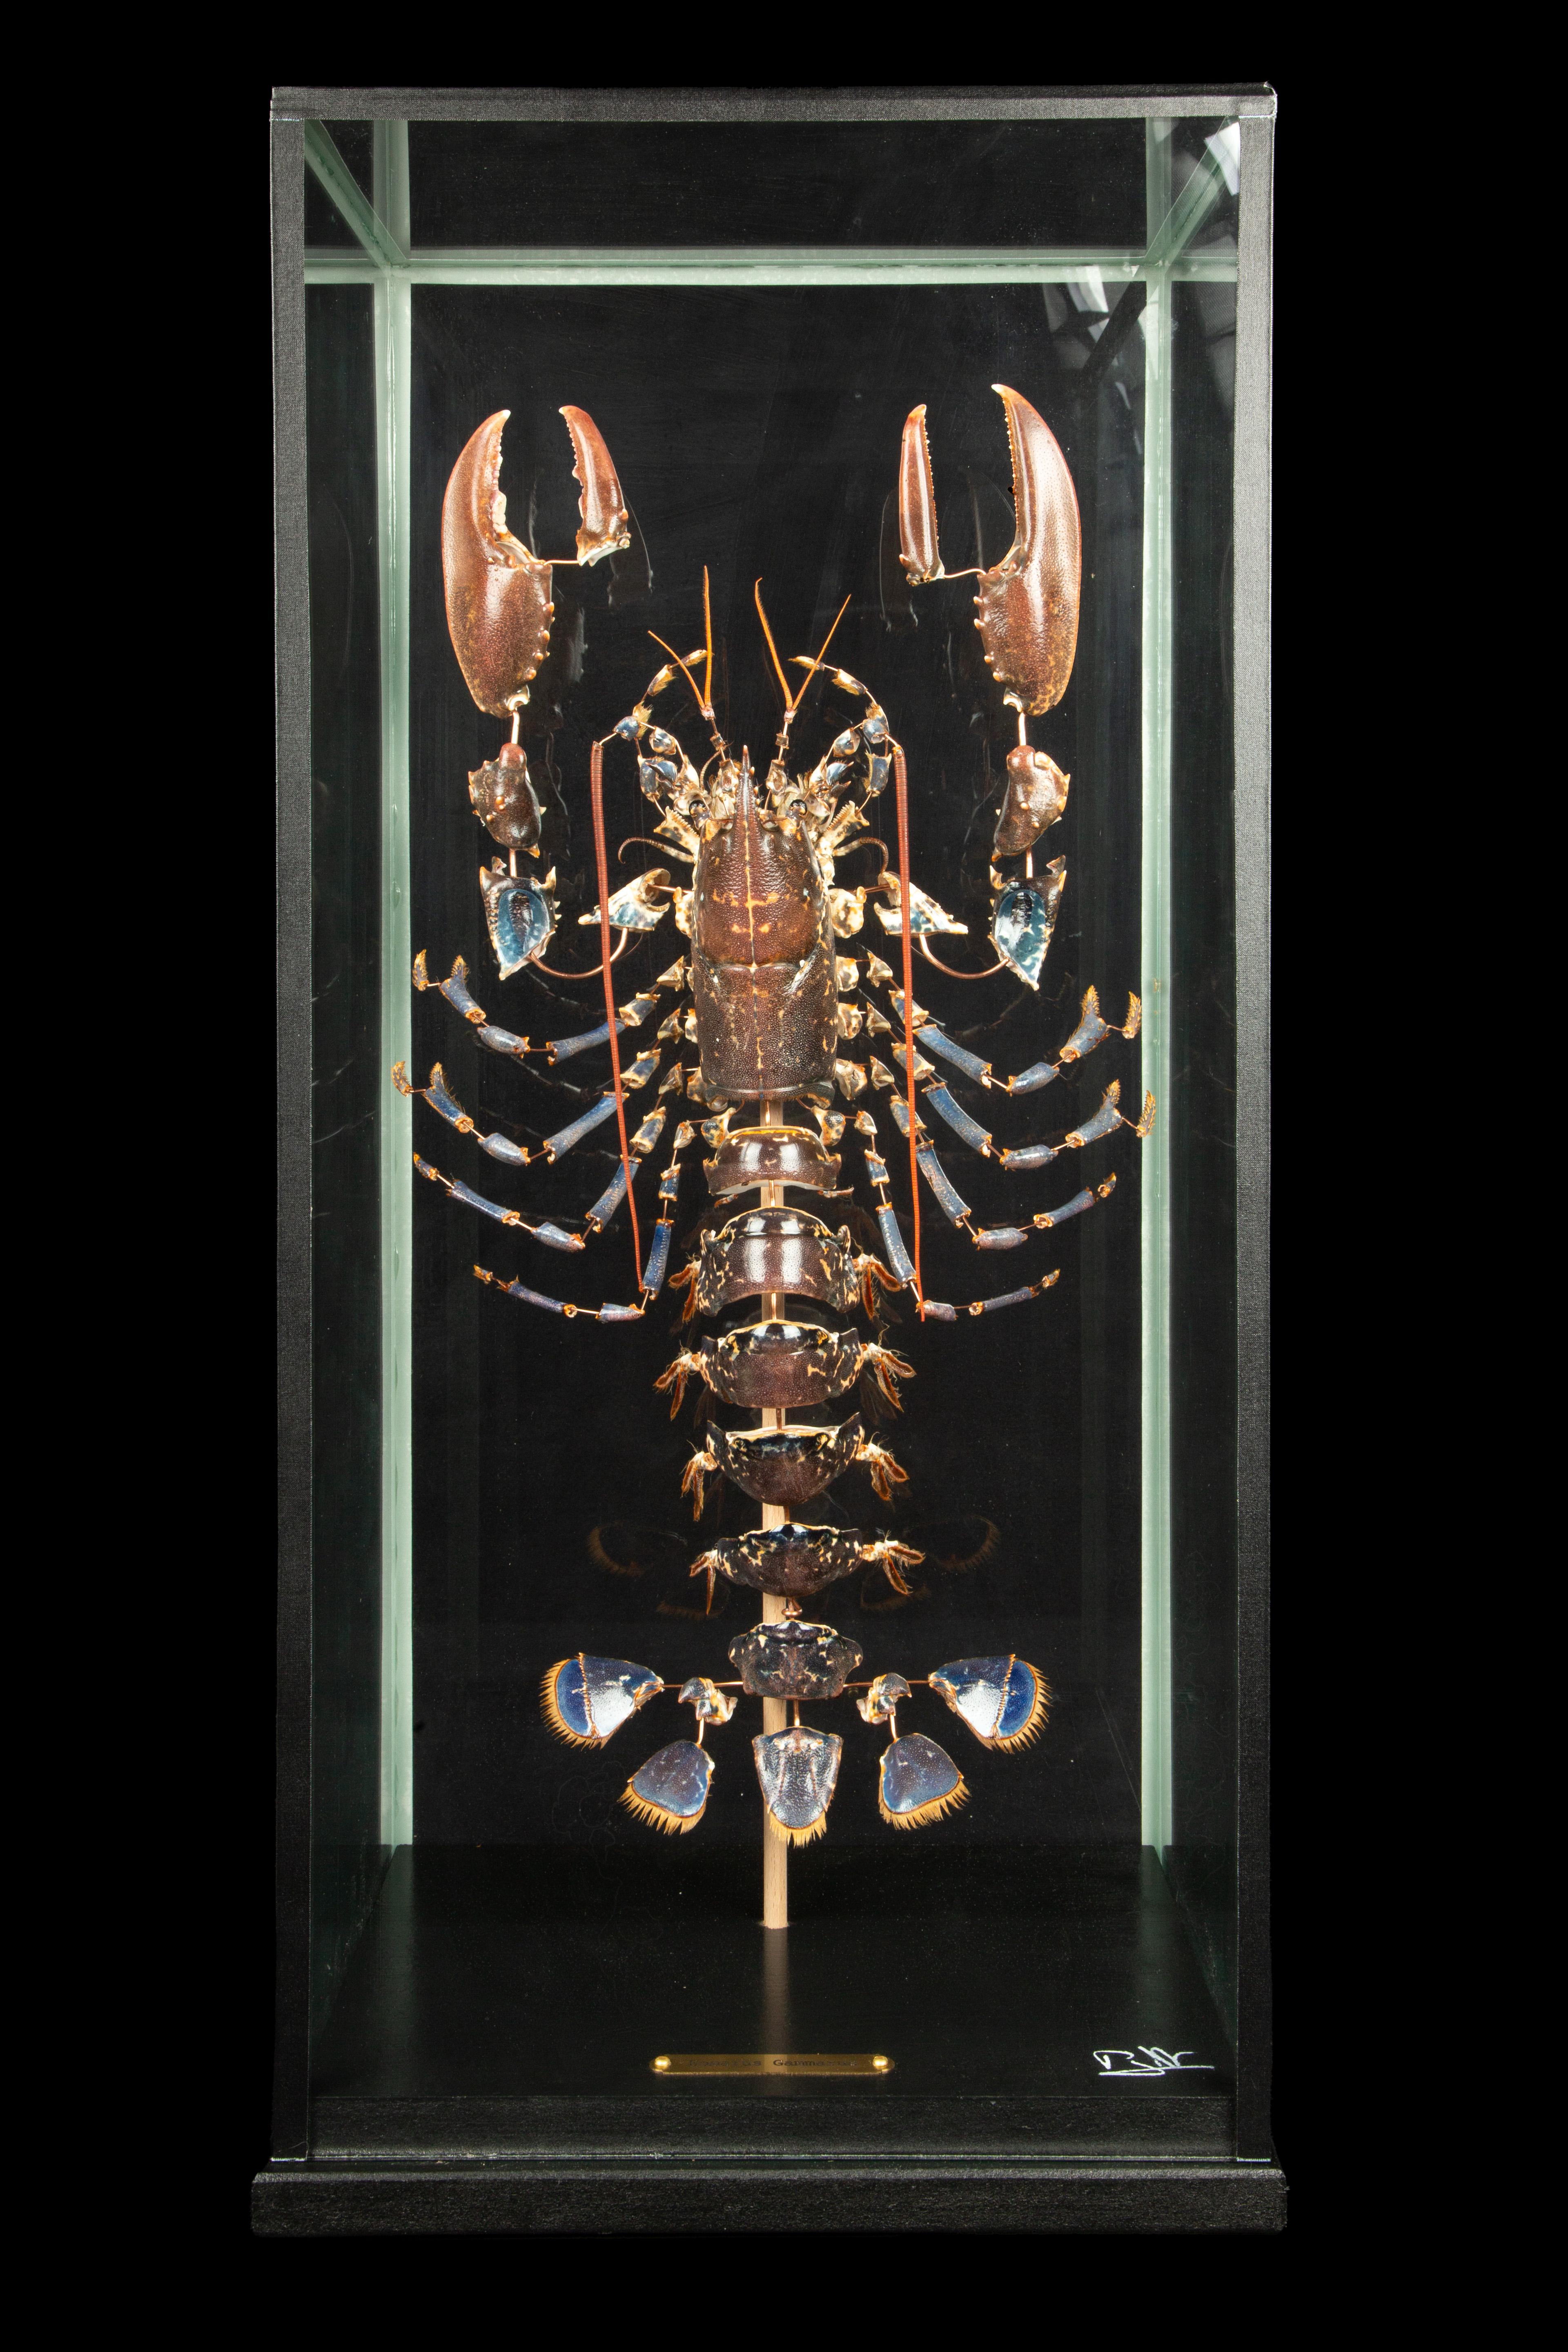 Deconstructed European Lobster (Homarus Gammarus) Under Custom Glass Case.

The European lobster, also referred to as the common lobster or Homarus gammarus, belongs to the clawed lobster family and inhabits the eastern Atlantic Ocean, the